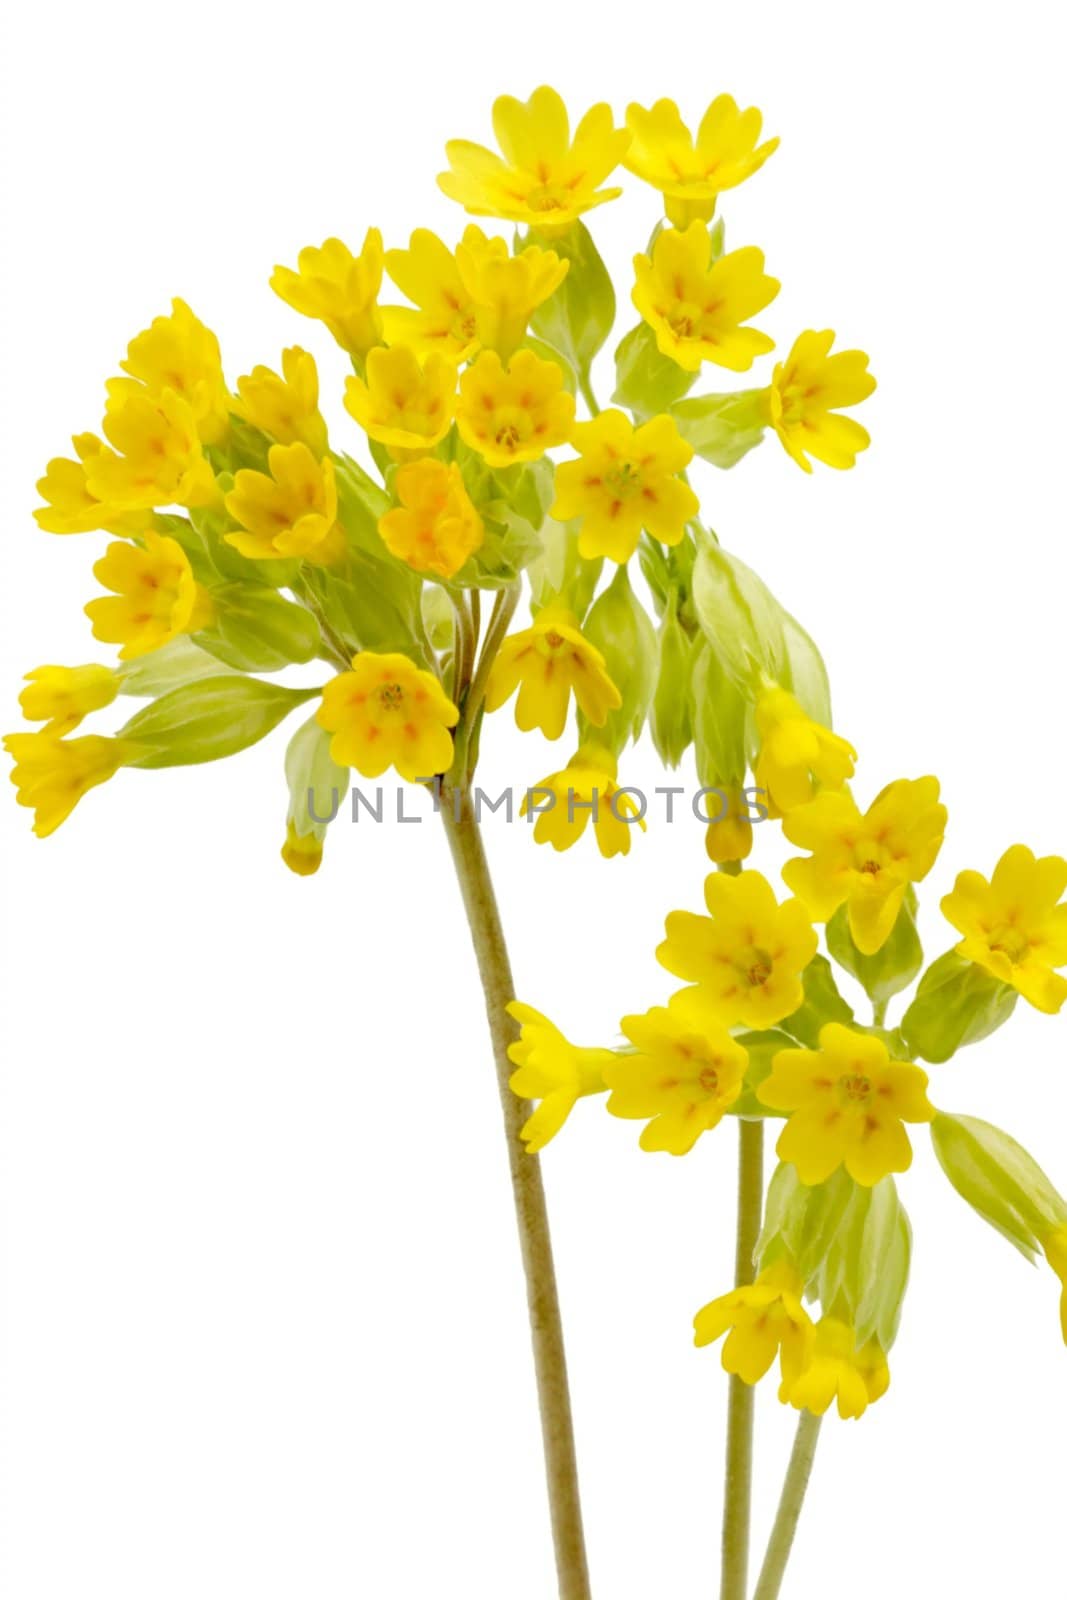 Close-up of cowslips - isolated on white background